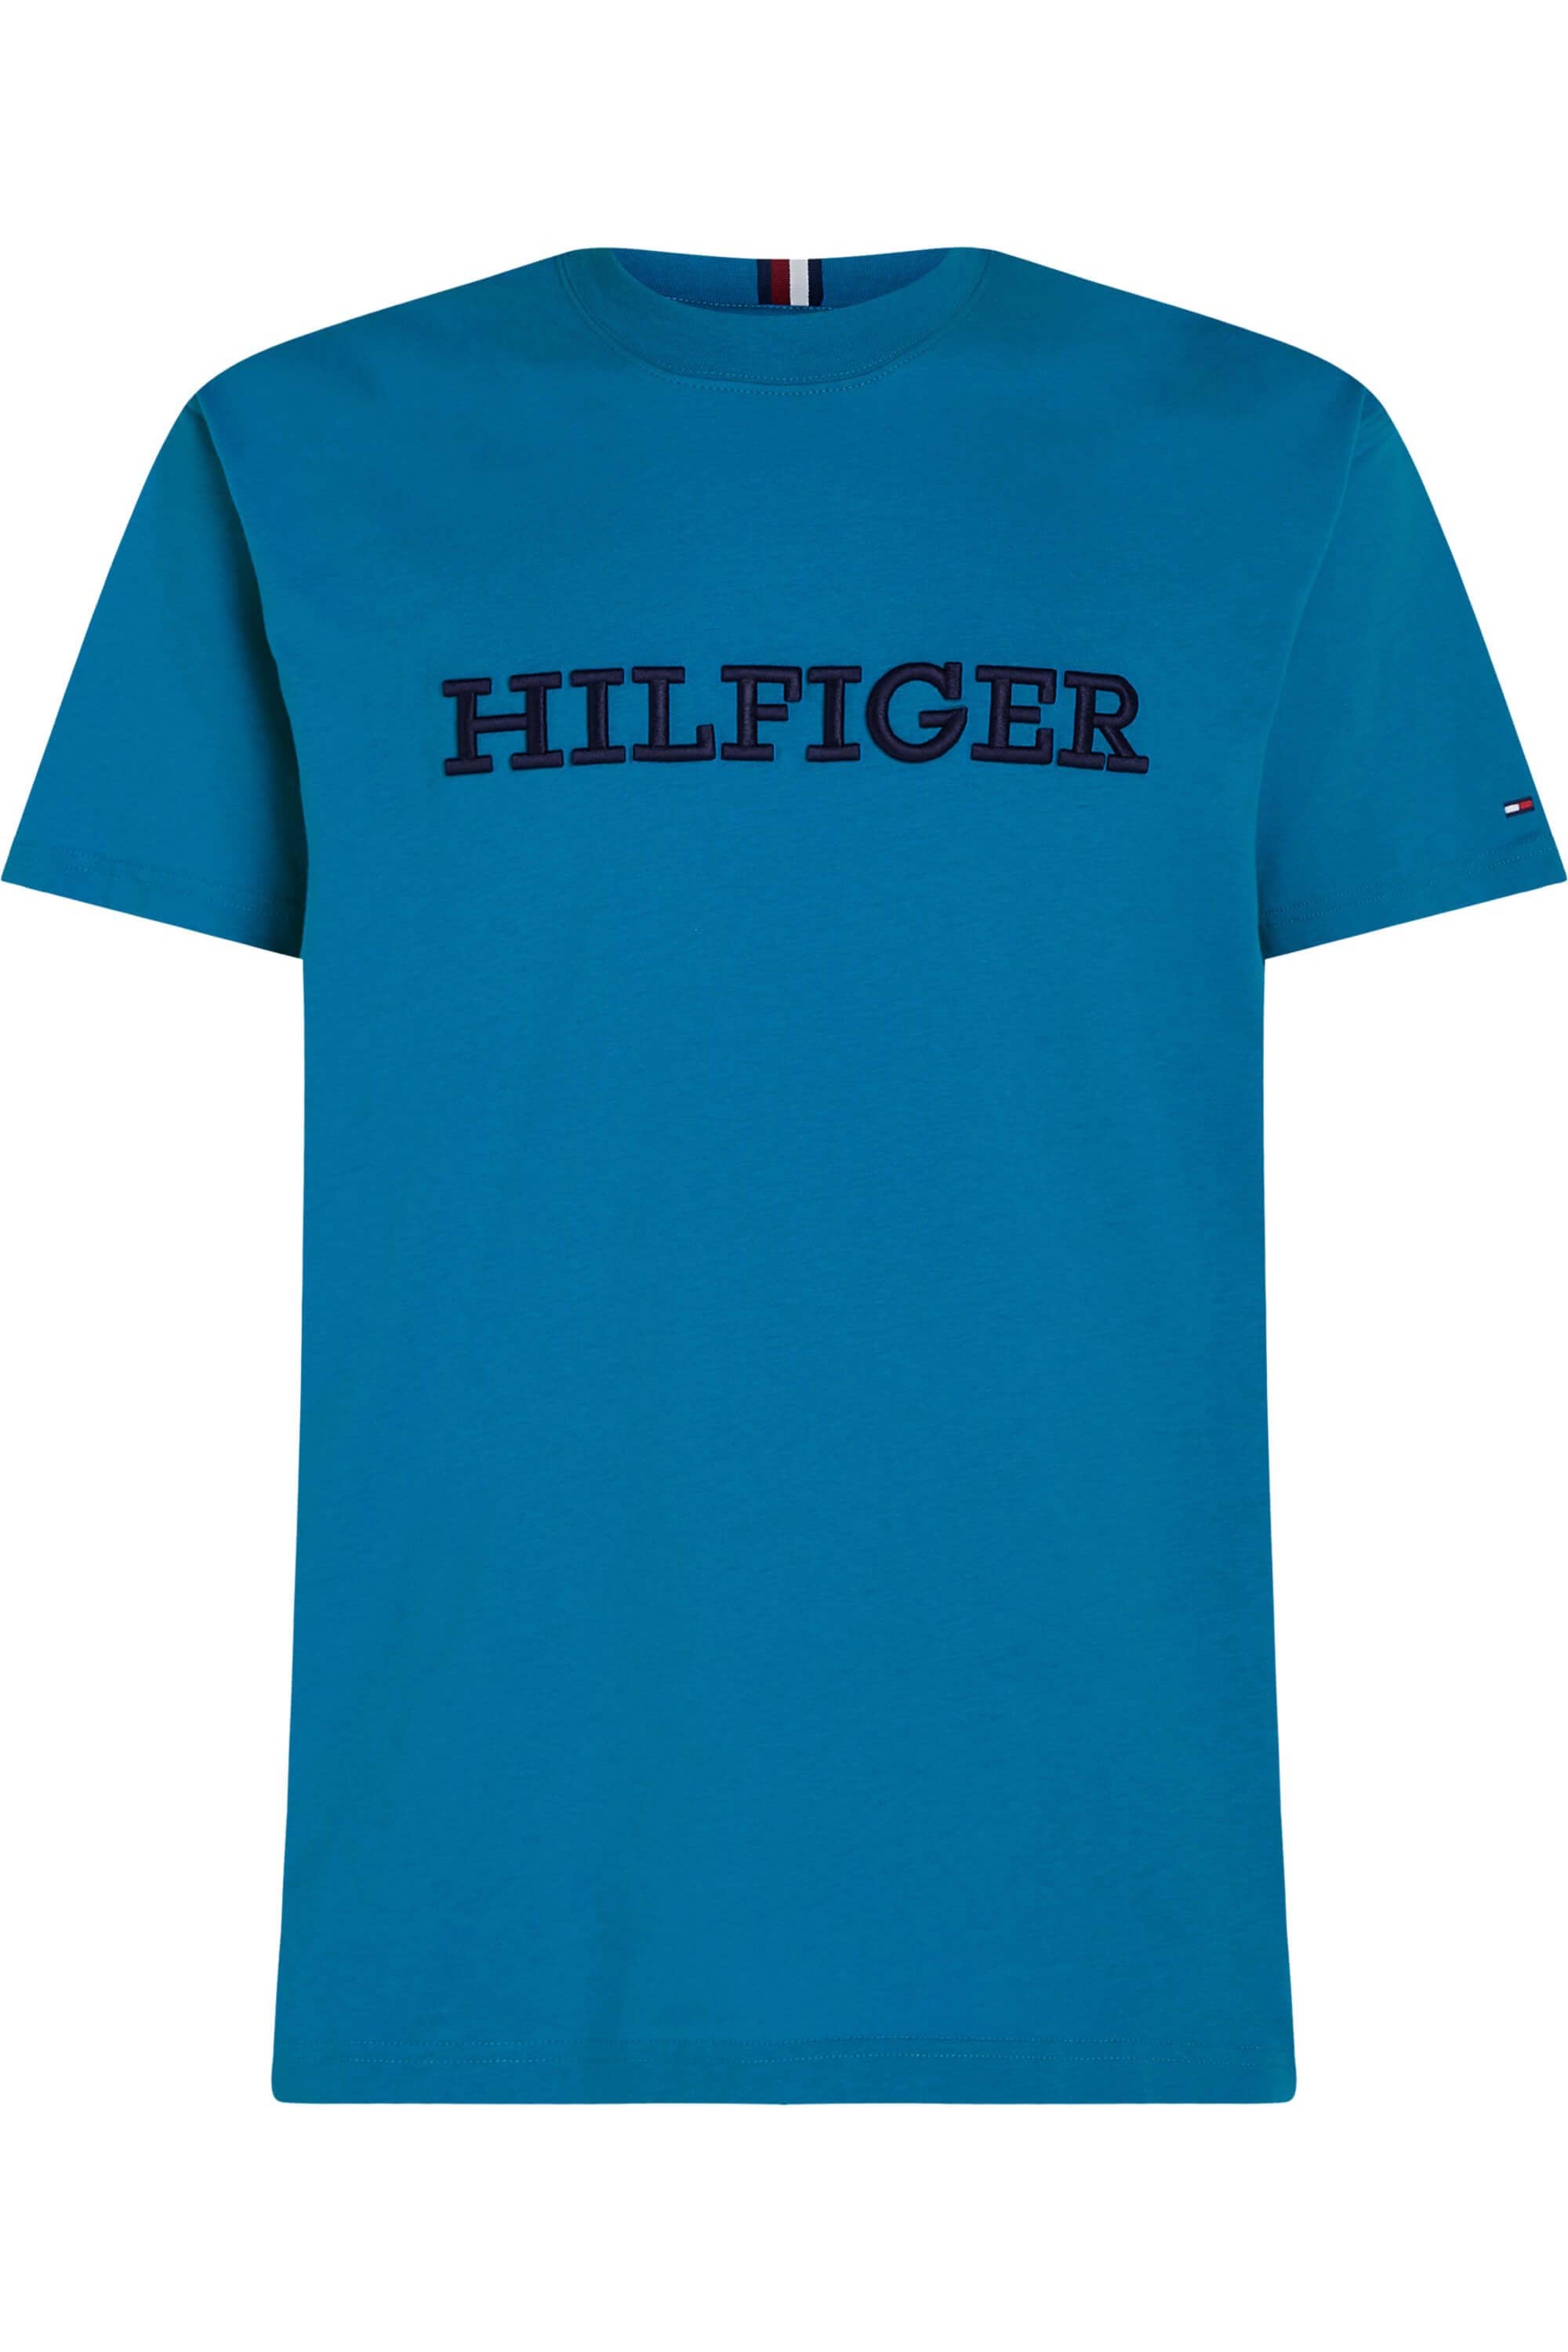 Tommy Monotype Hilfiger T-Shirt Aqua Embroidered